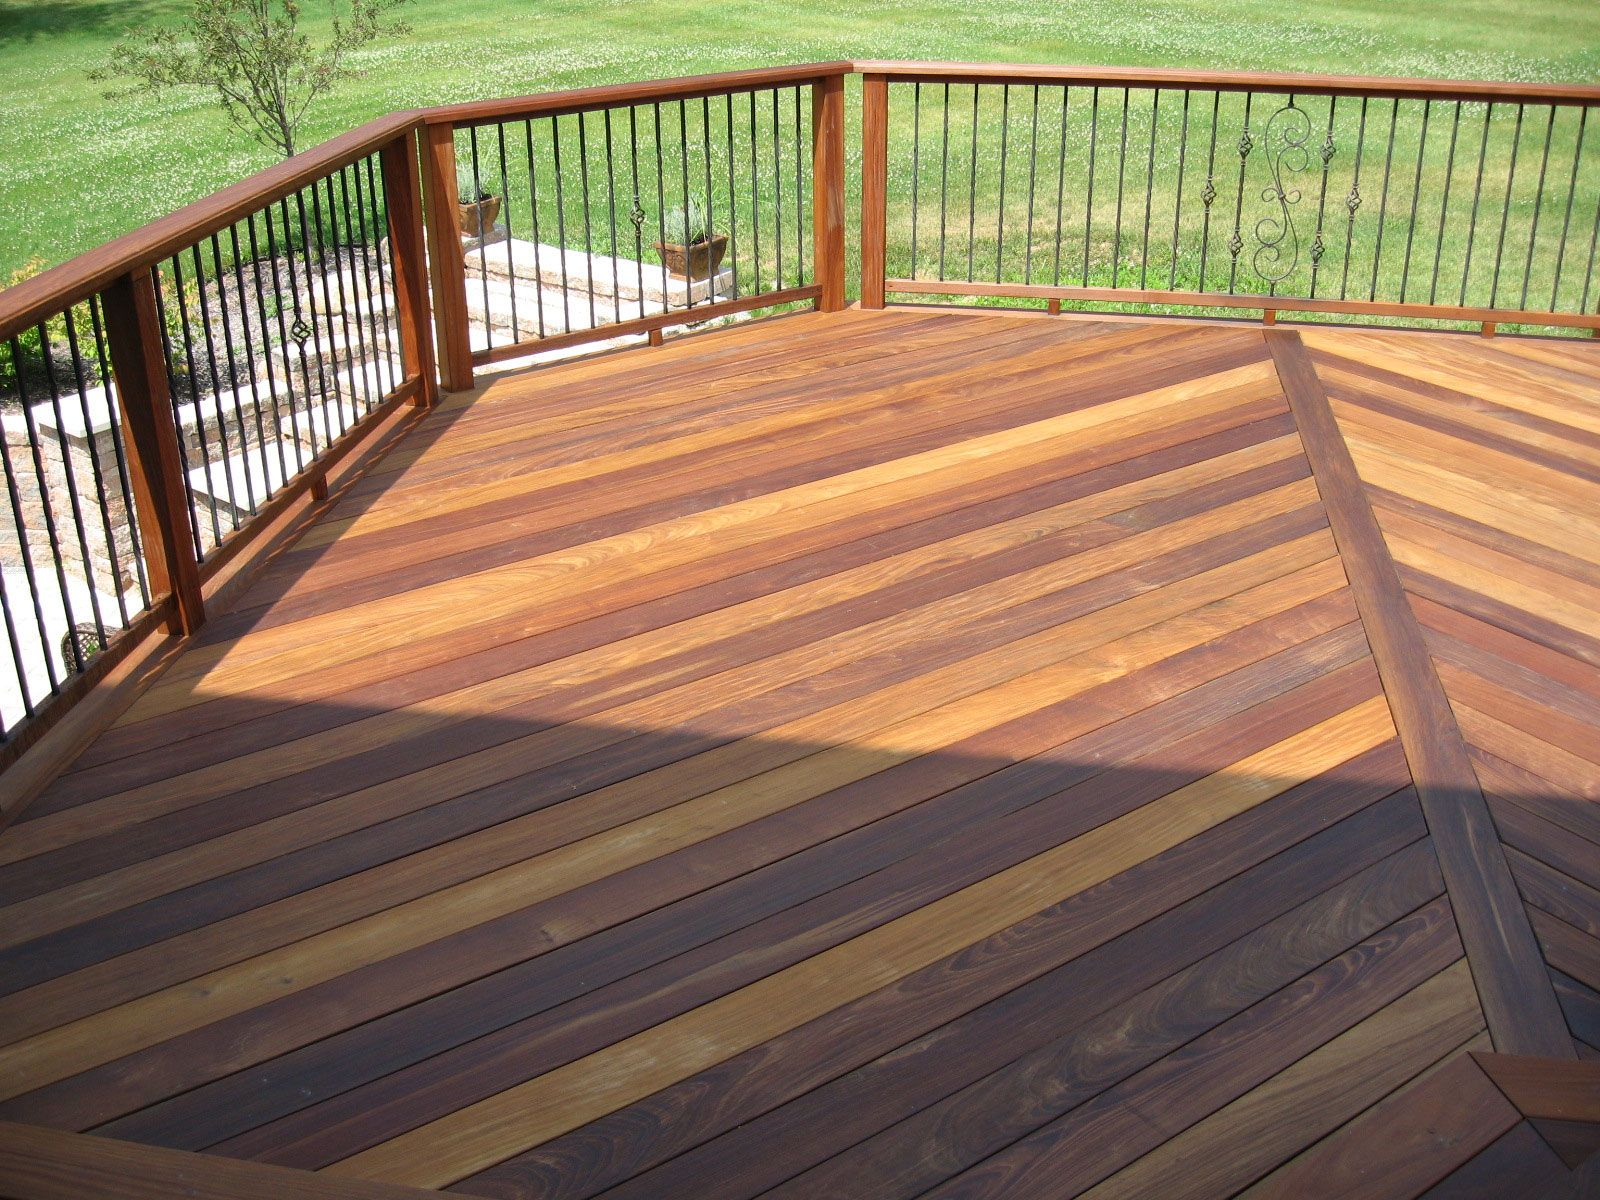 Gallery Timber Flooring Decking Screening Bamboo Pine intended for proportions 1600 X 1200